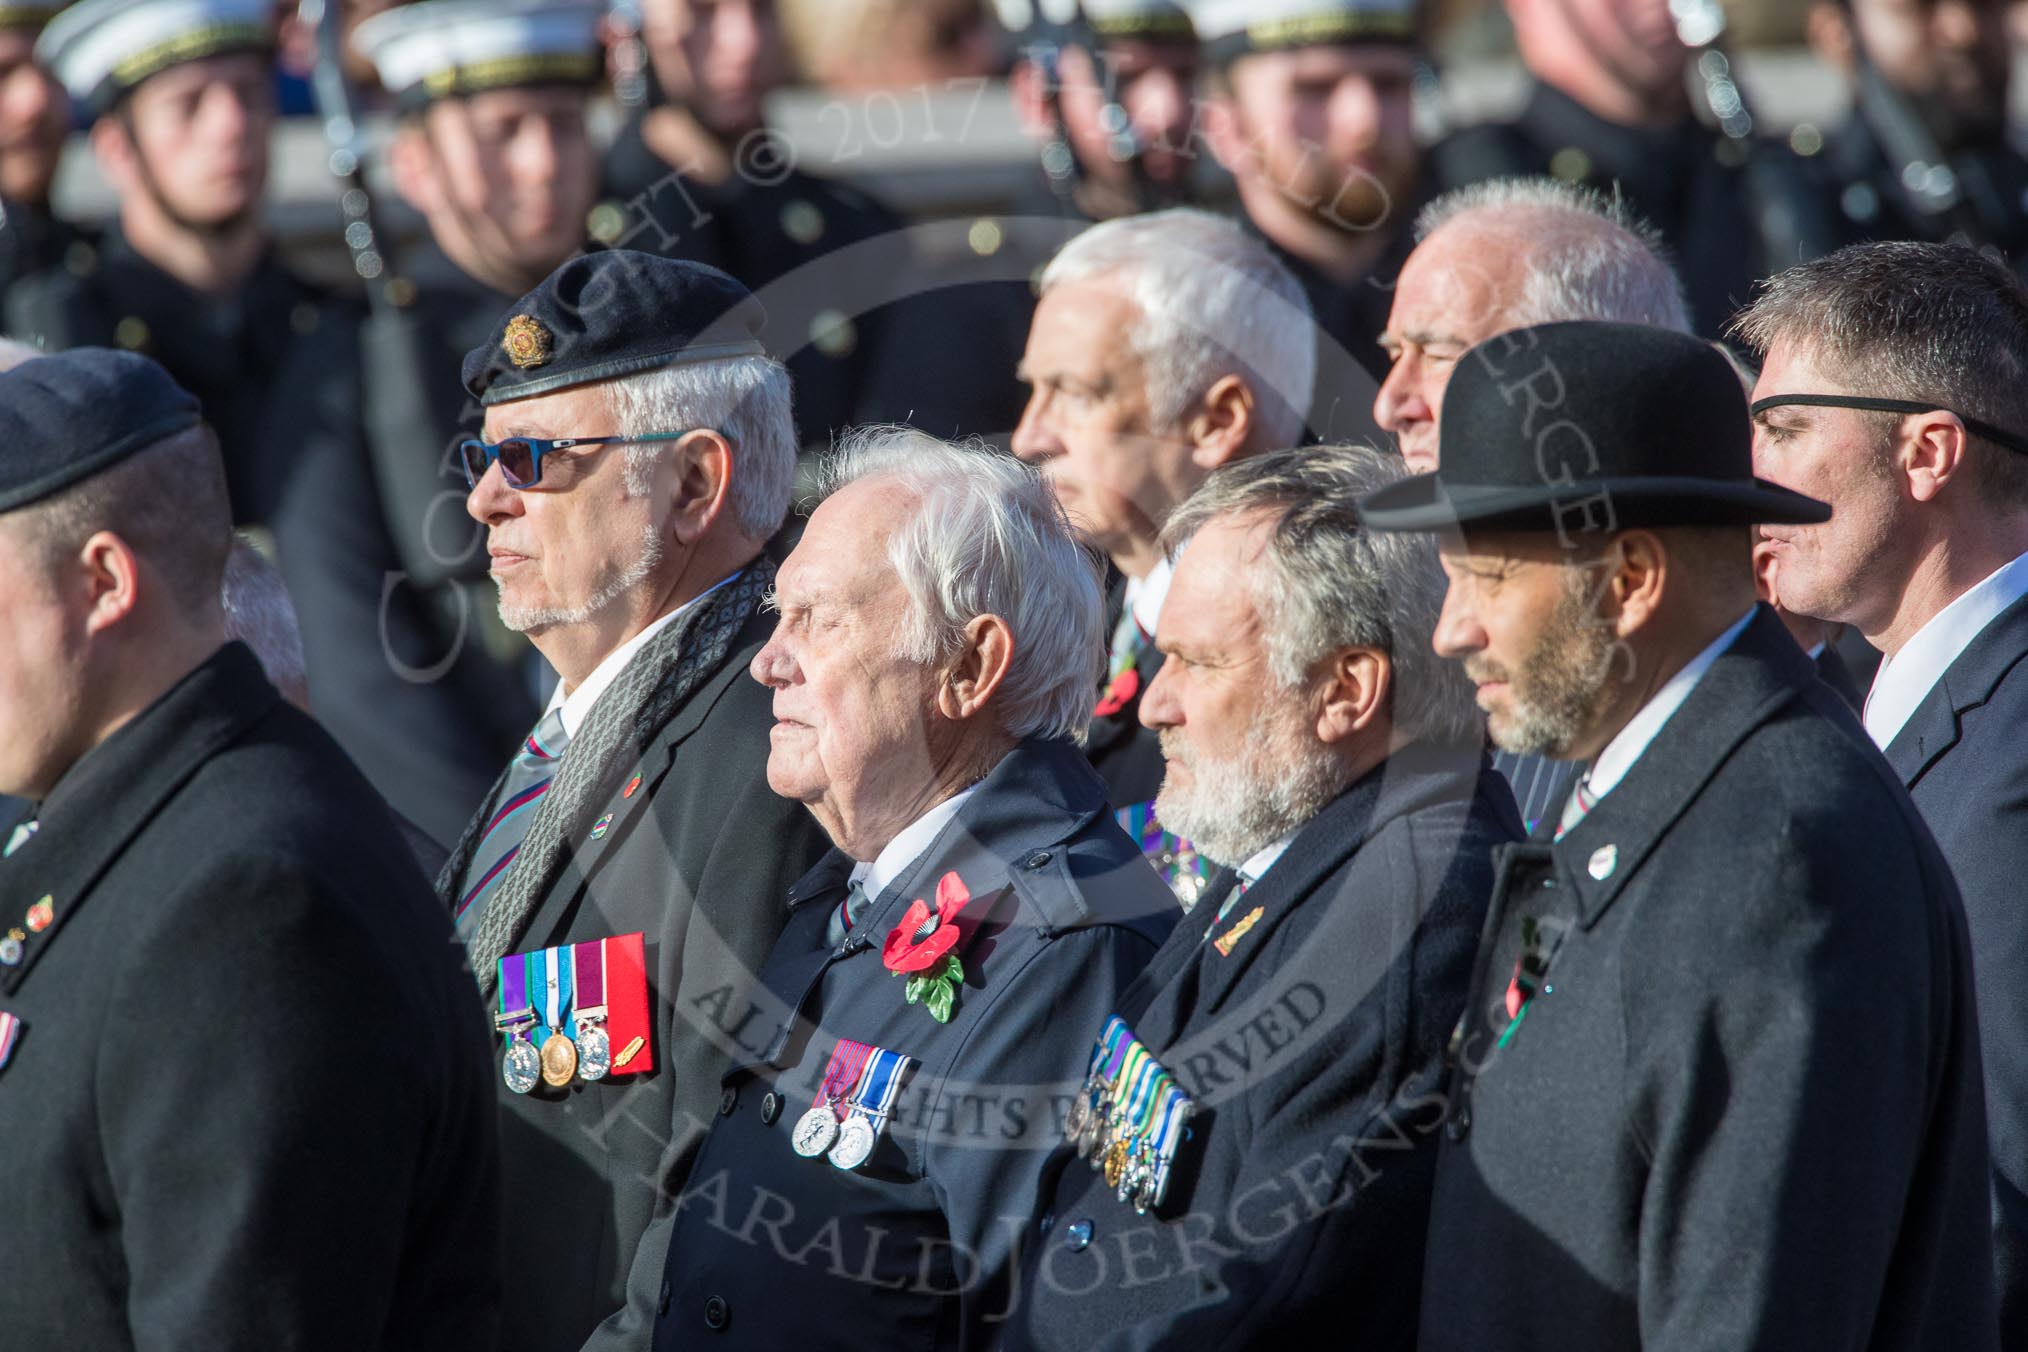 Gallantry Medallists' League (Group F9, 38 members) during the Royal British Legion March Past on Remembrance Sunday at the Cenotaph, Whitehall, Westminster, London, 11 November 2018, 11:51.